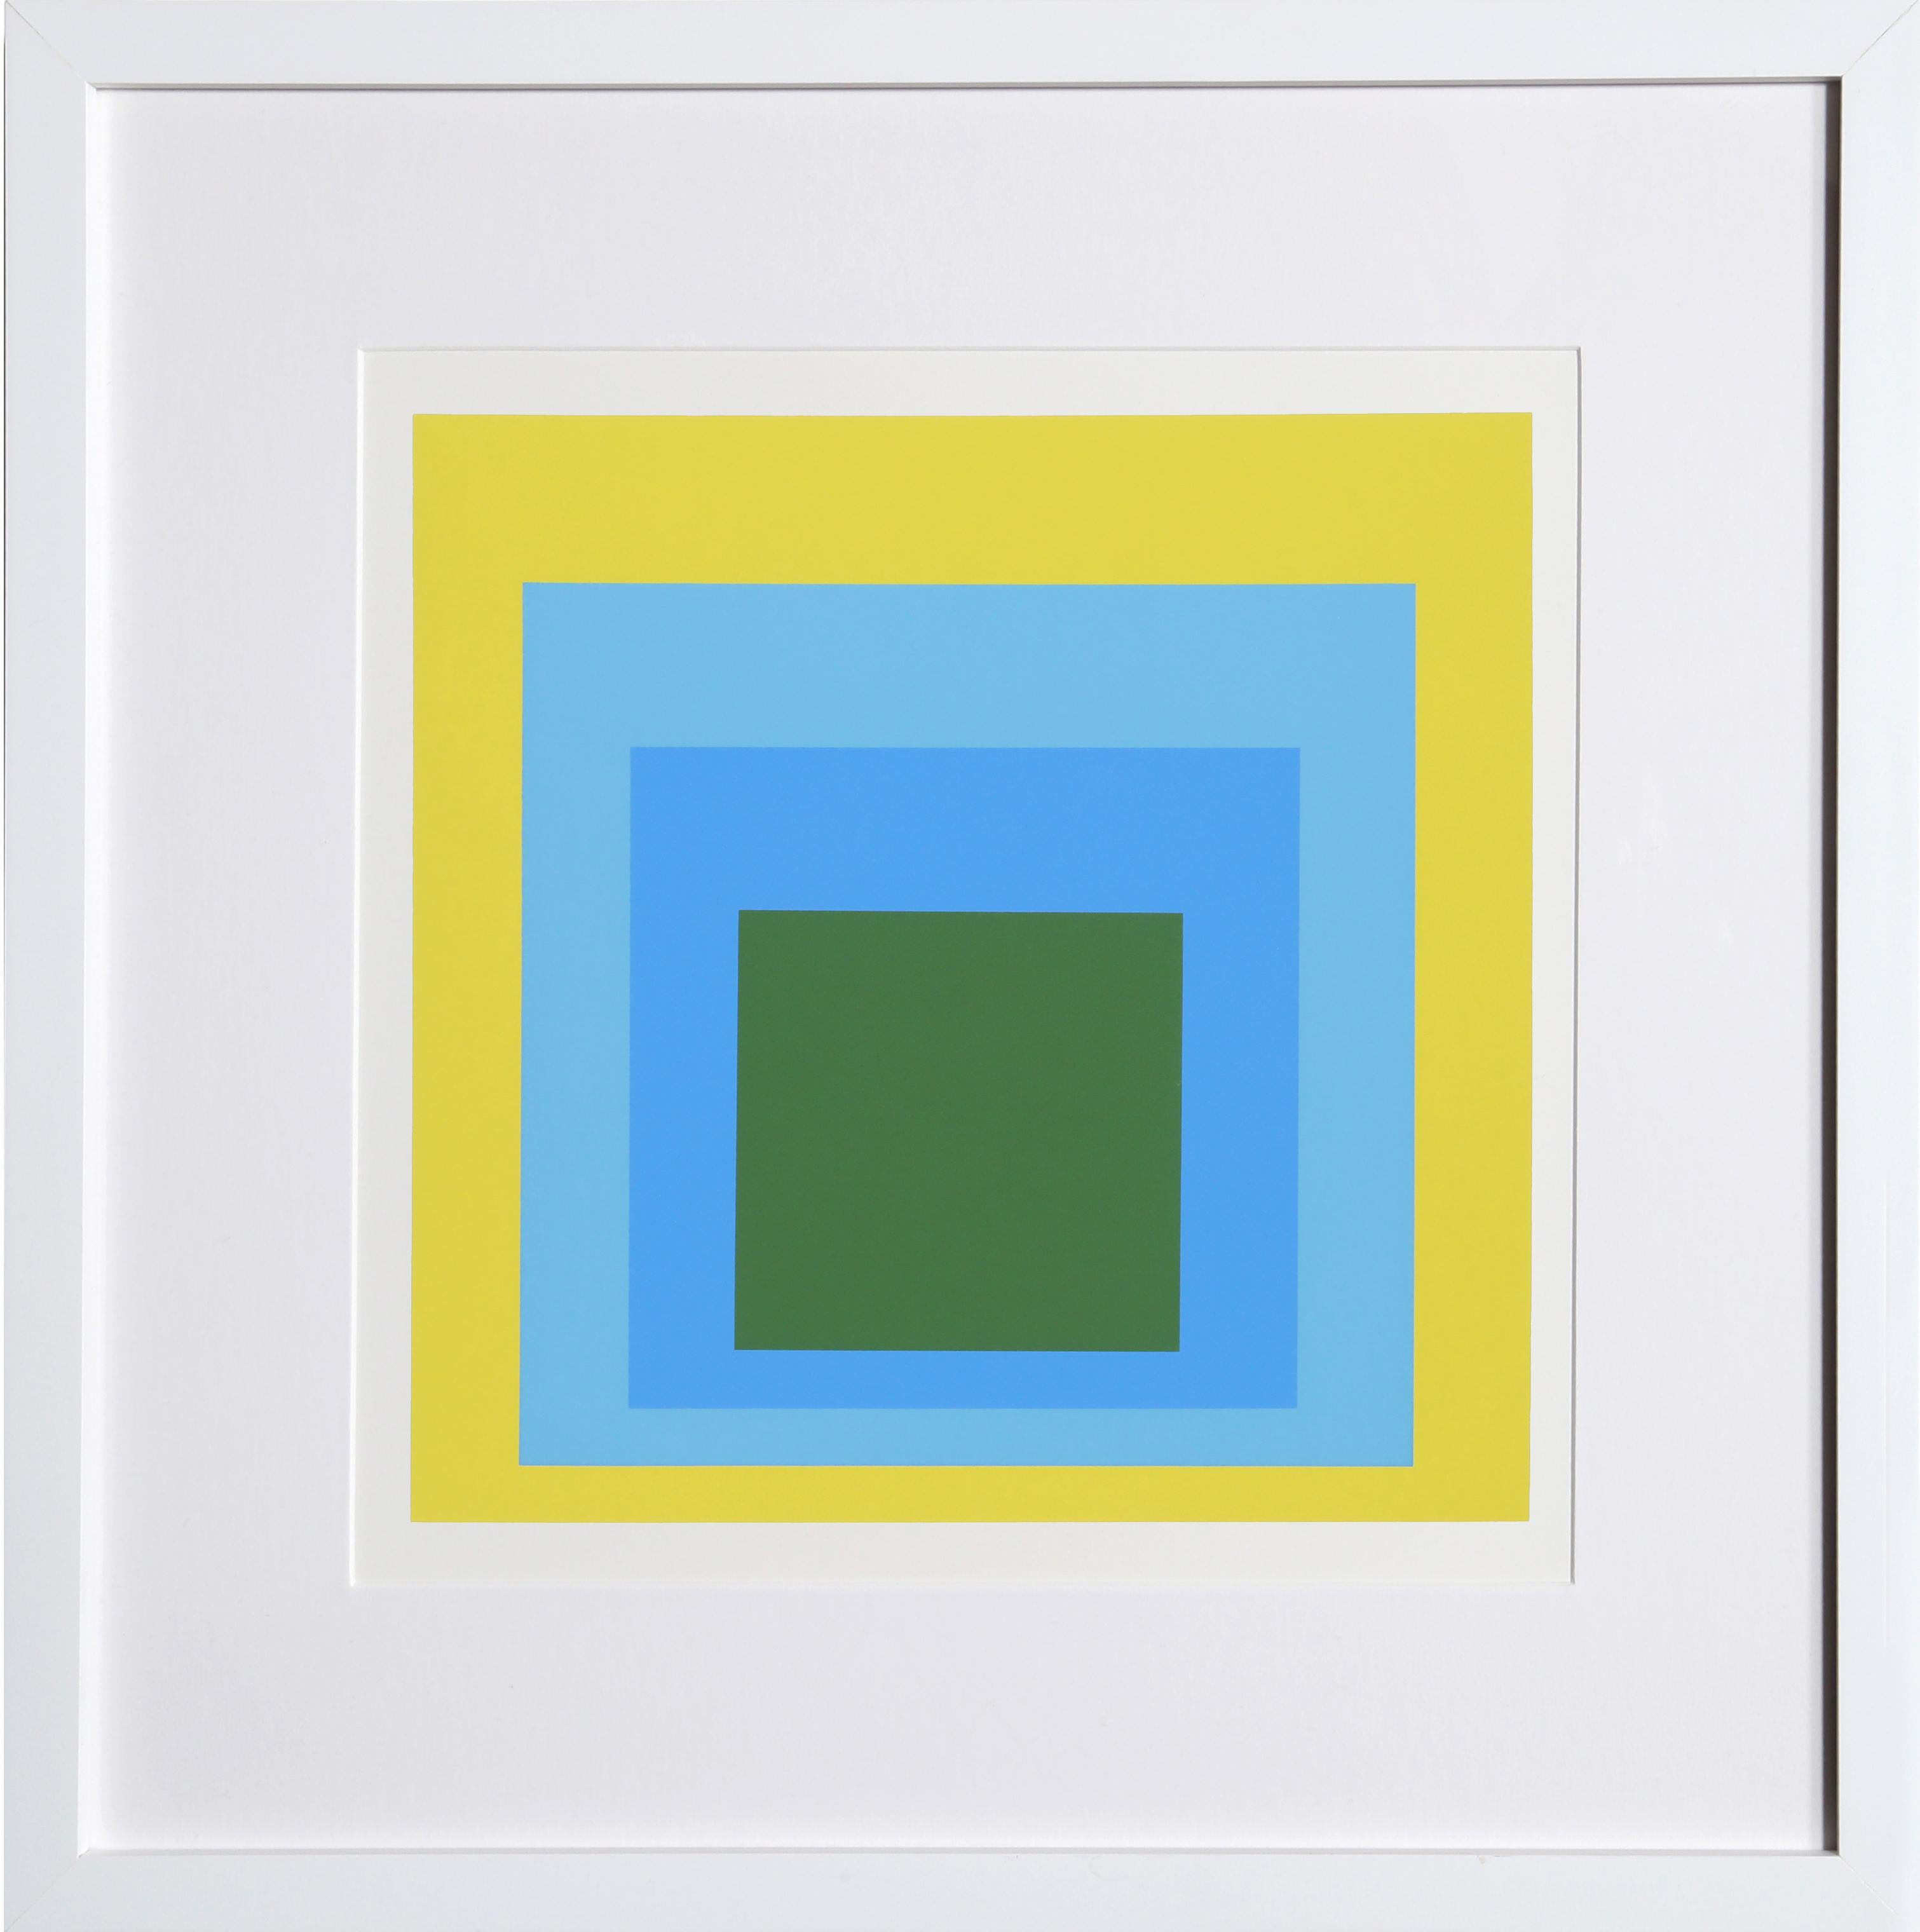 Abstract Print Josef Albers - Hommage au carré - P1, F5, I1